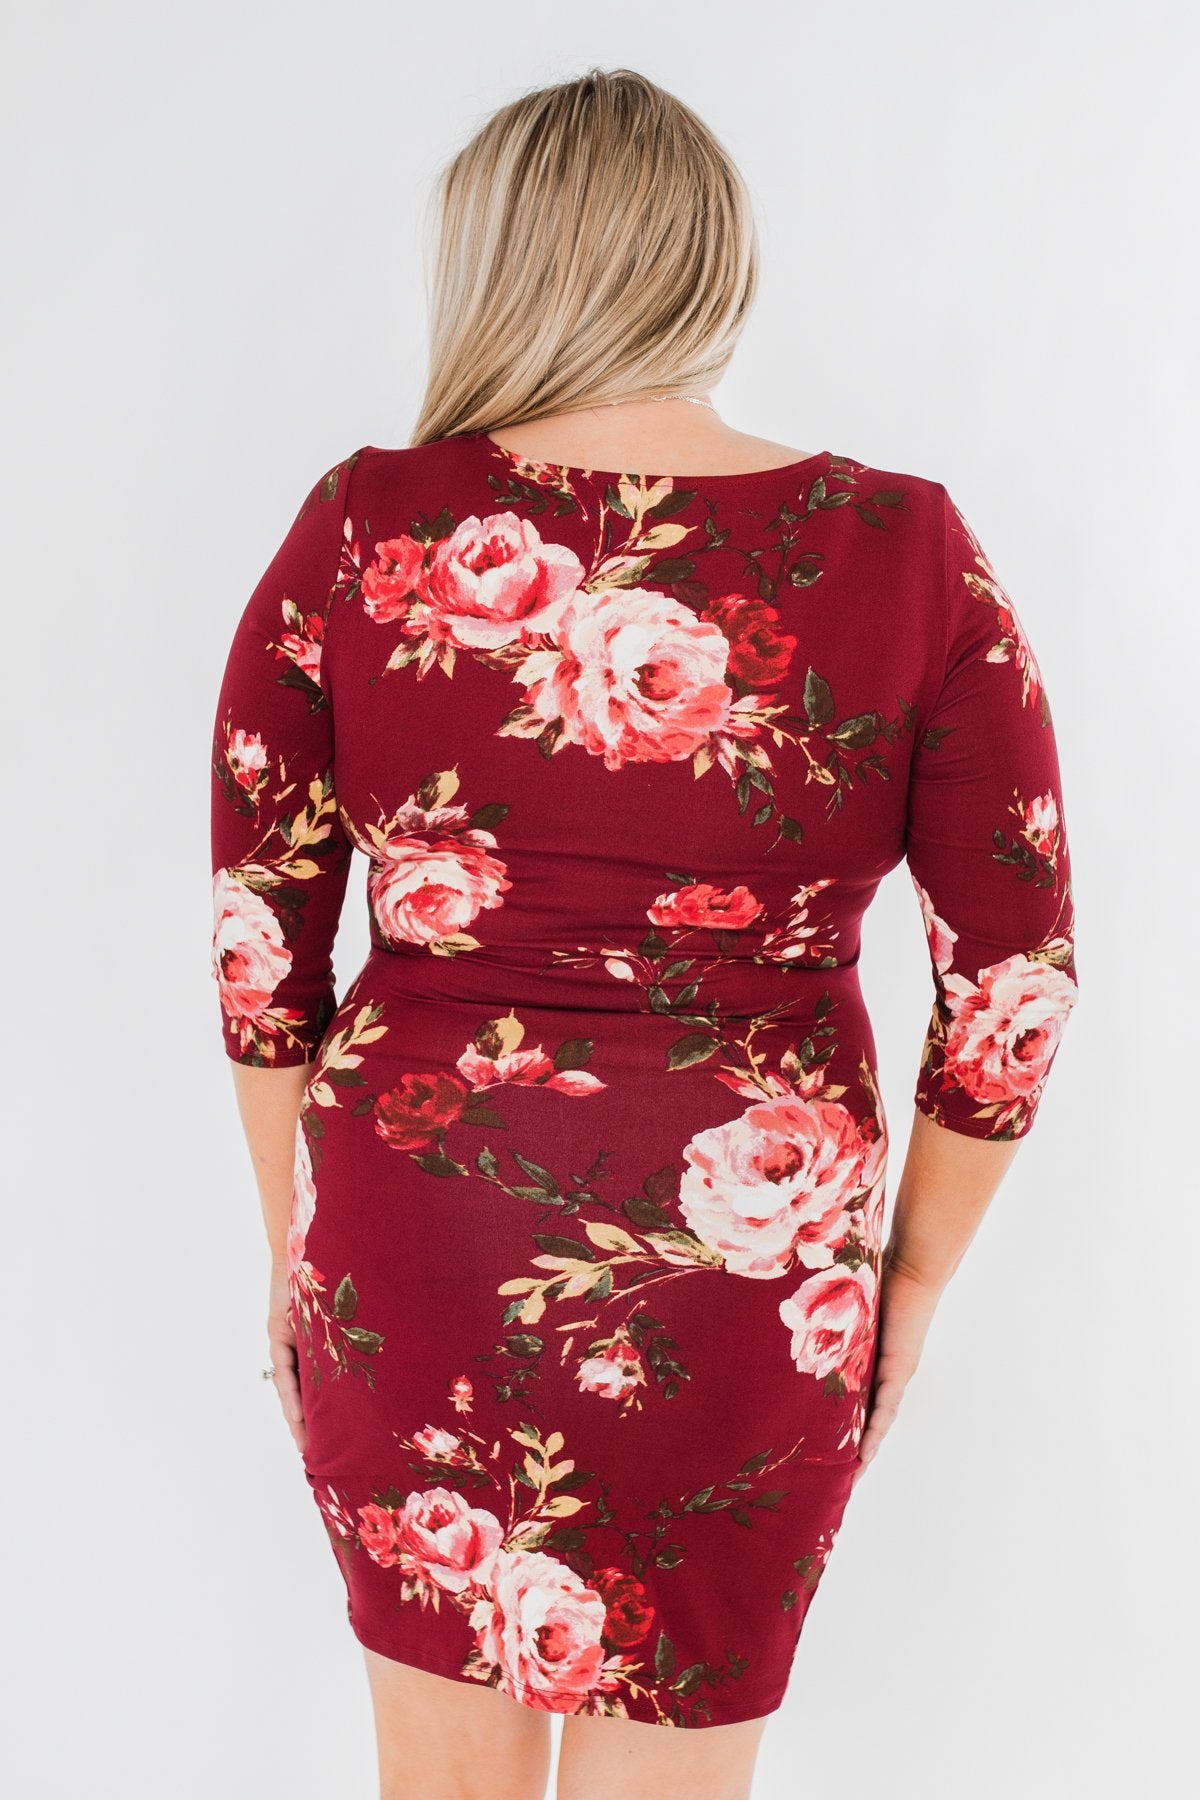 Stand In Your Love Floral Dress- Burgundy